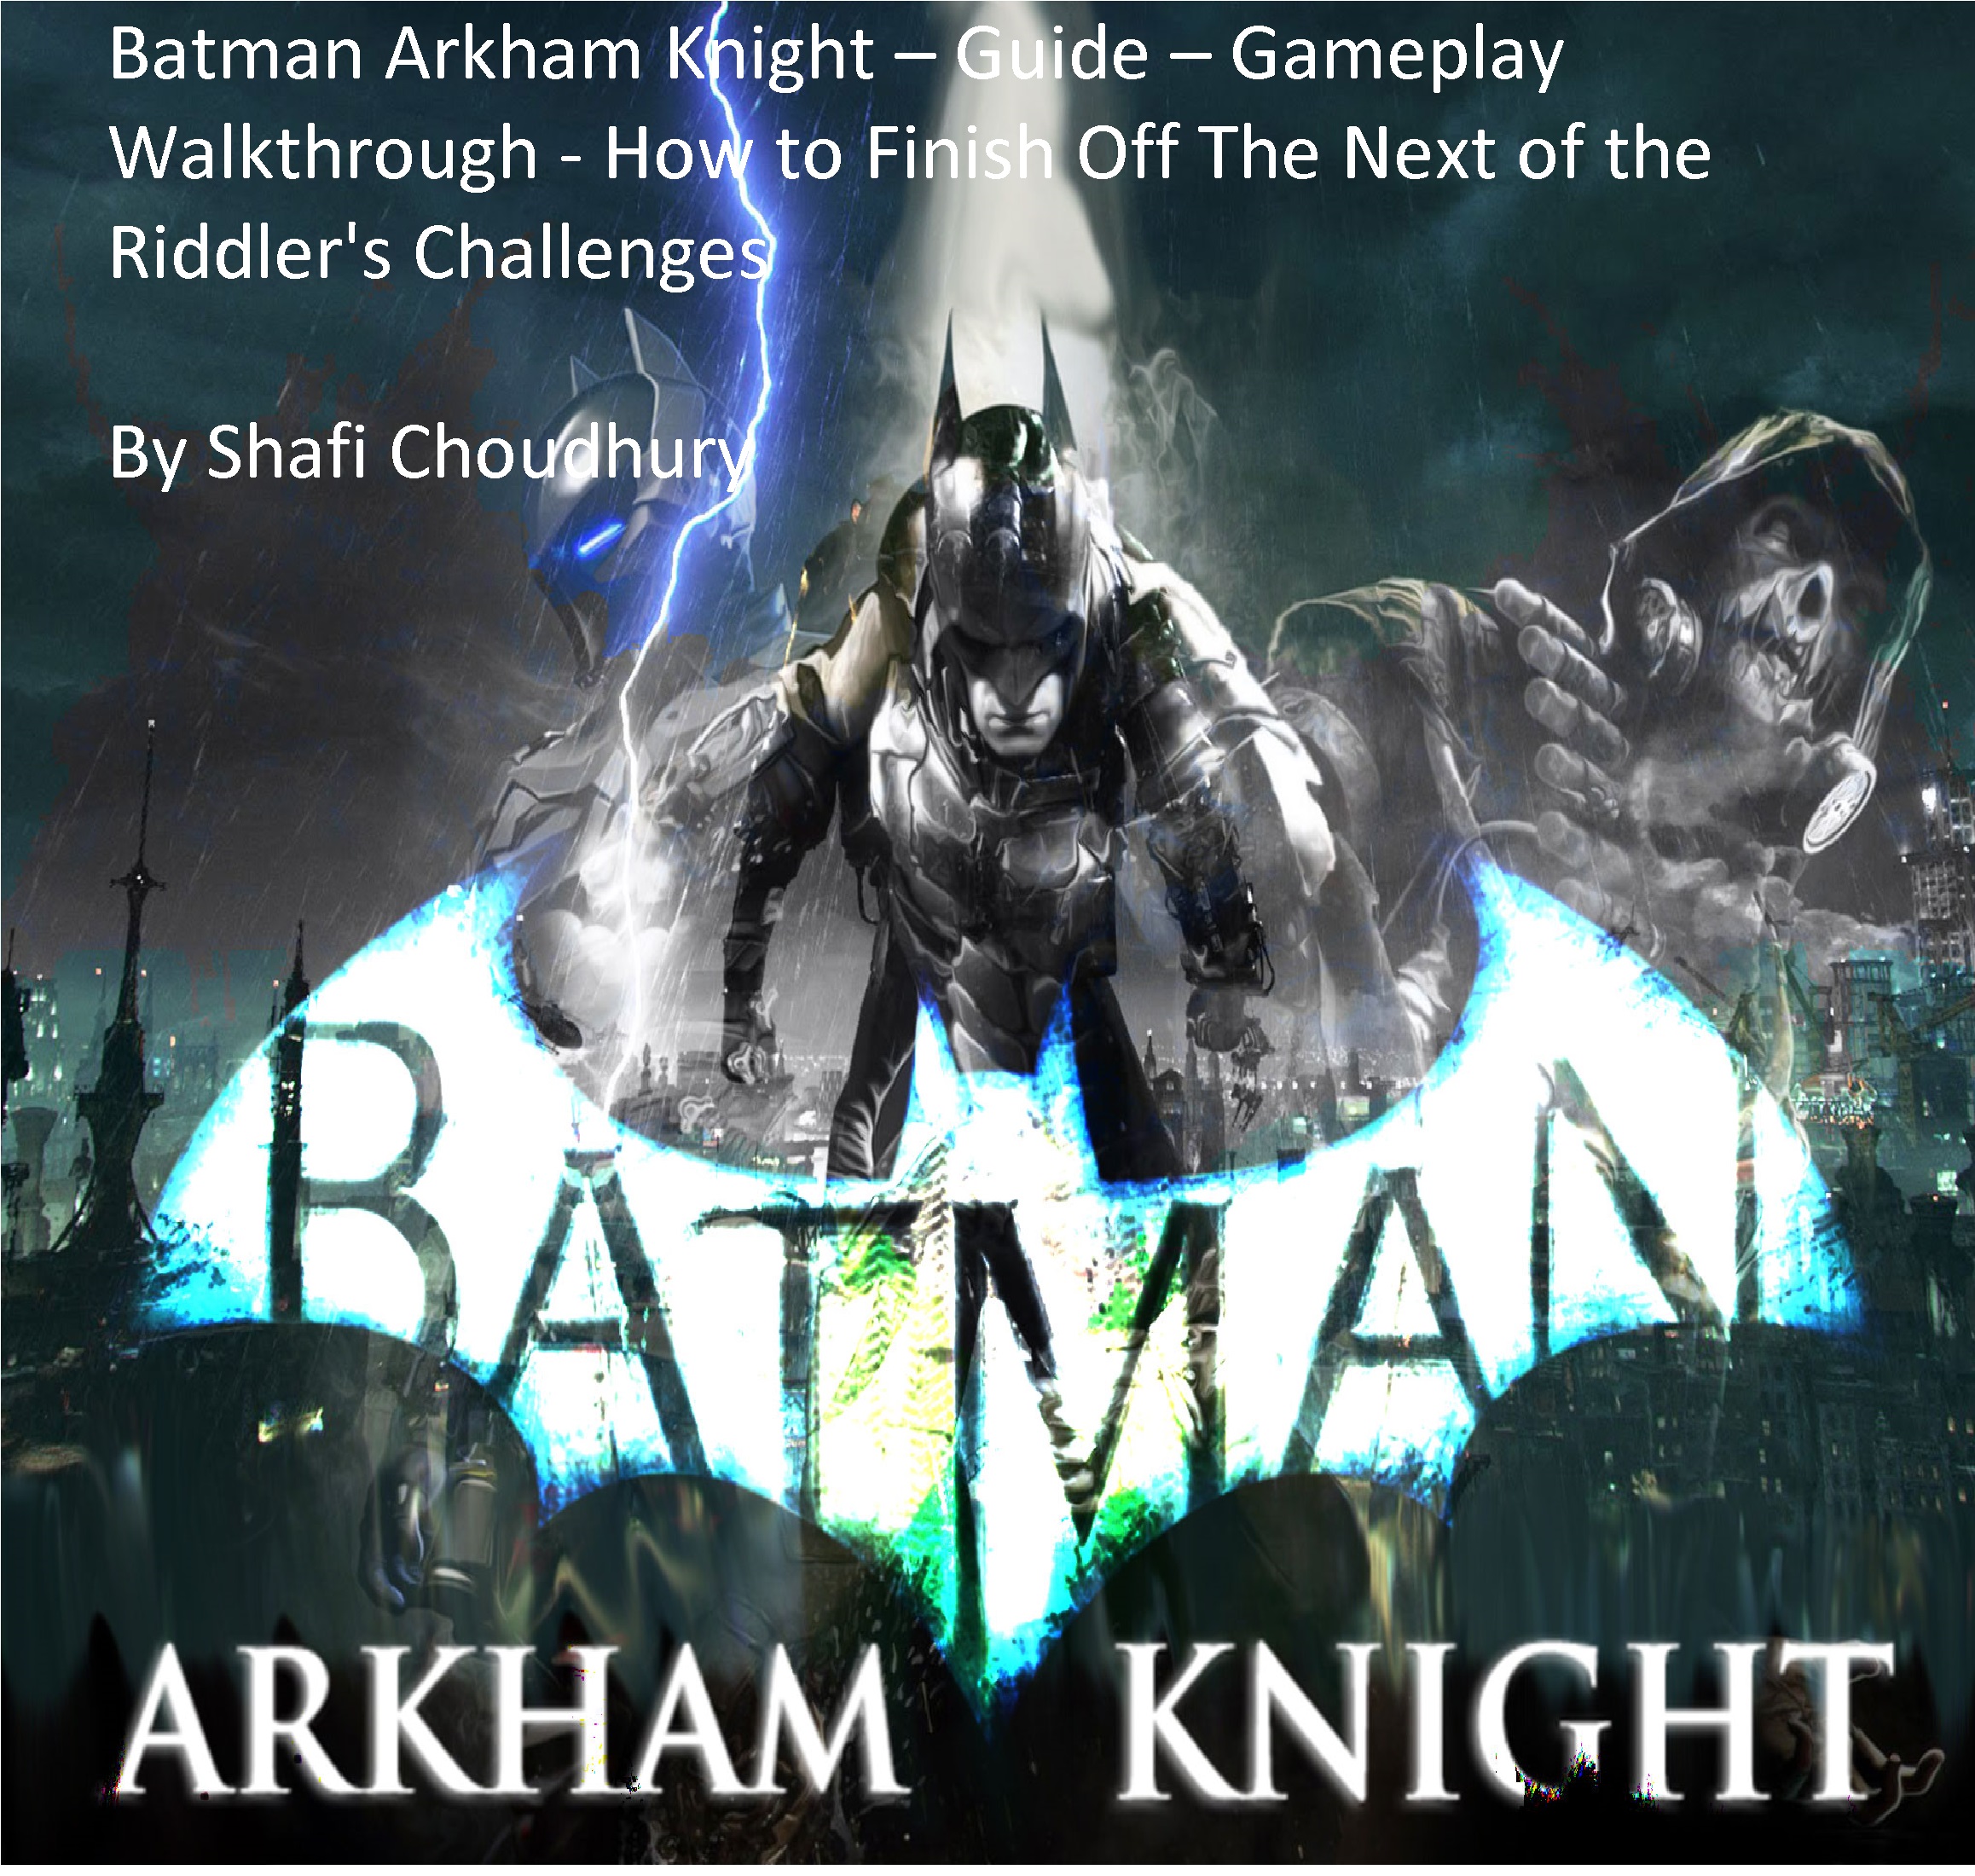 Smashwords – Batman Arkham Knight – Guide – Gameplay Walkthrough - How to  Finish Off The Next of the Riddler's Challenges – a book by Shafi Choudhury